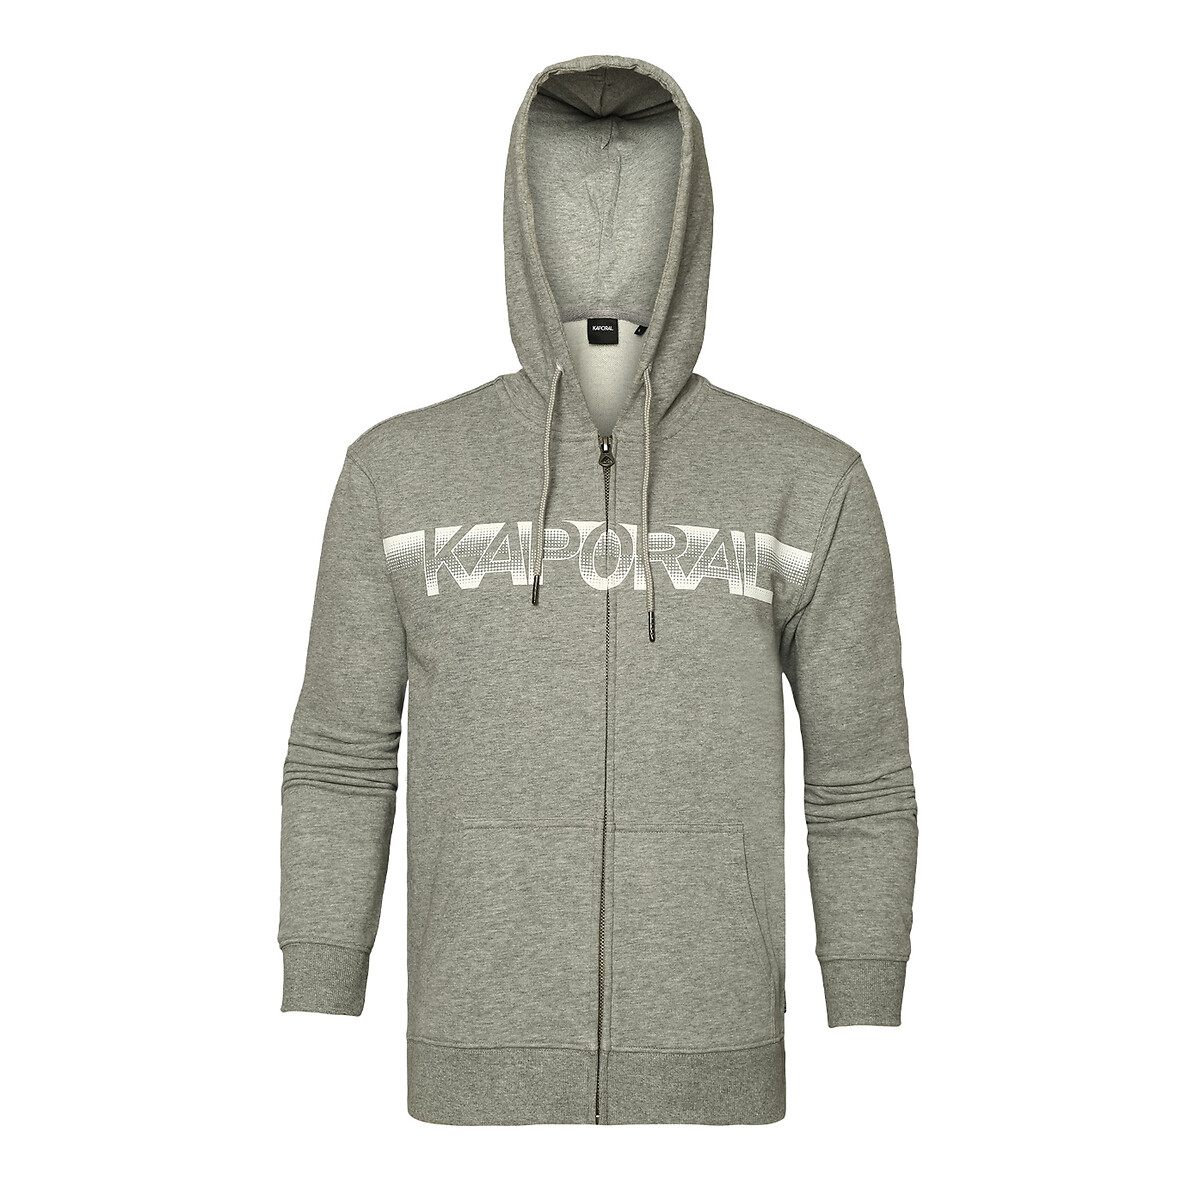 Barto Logo Print Hoodie in Cotton with Zip Fastening